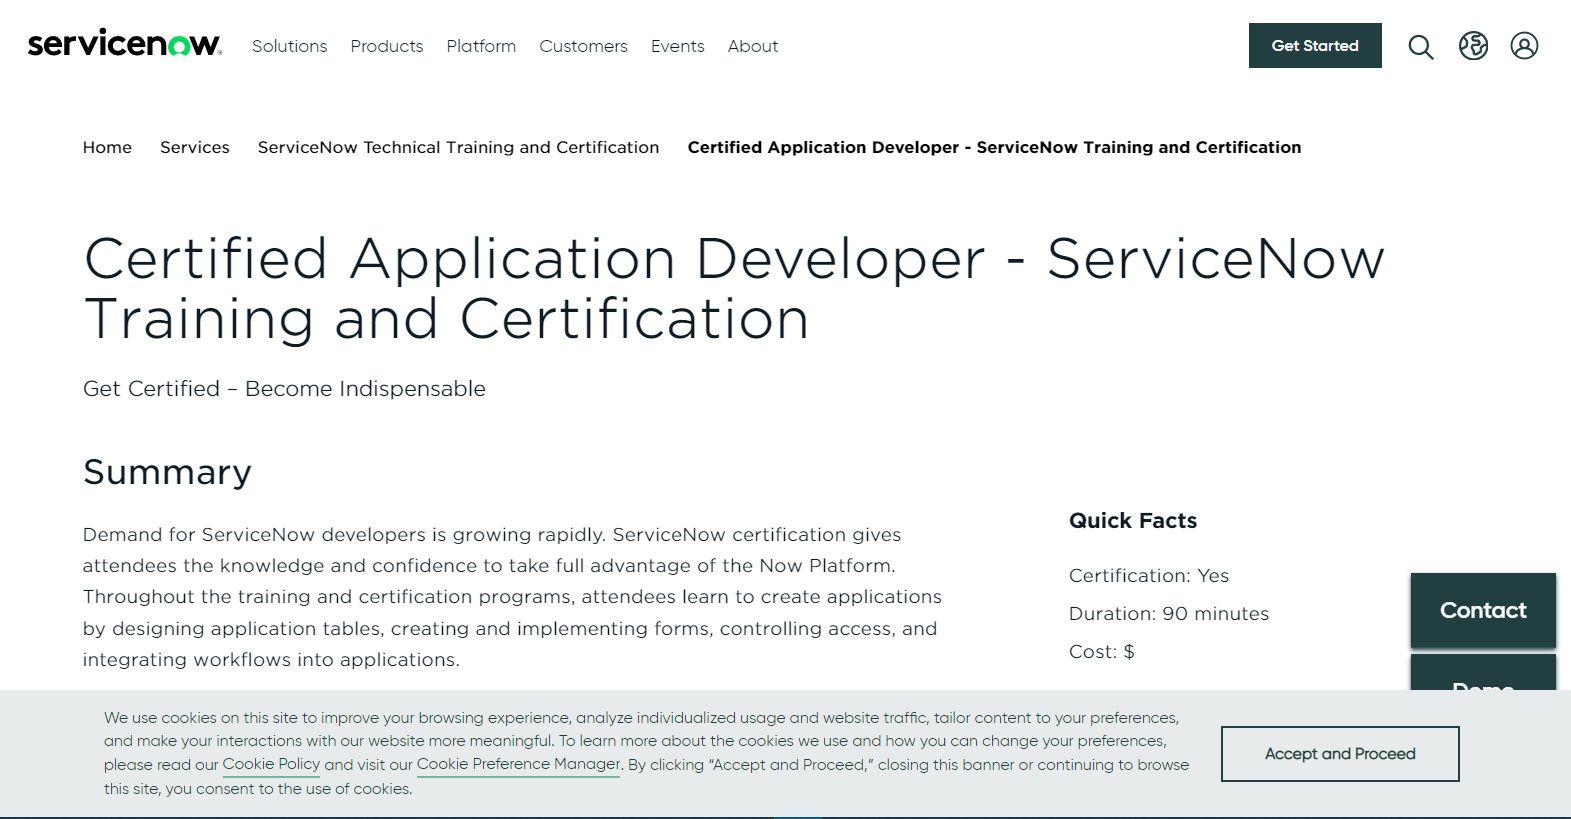 An image showing the ServiceNow website homepage